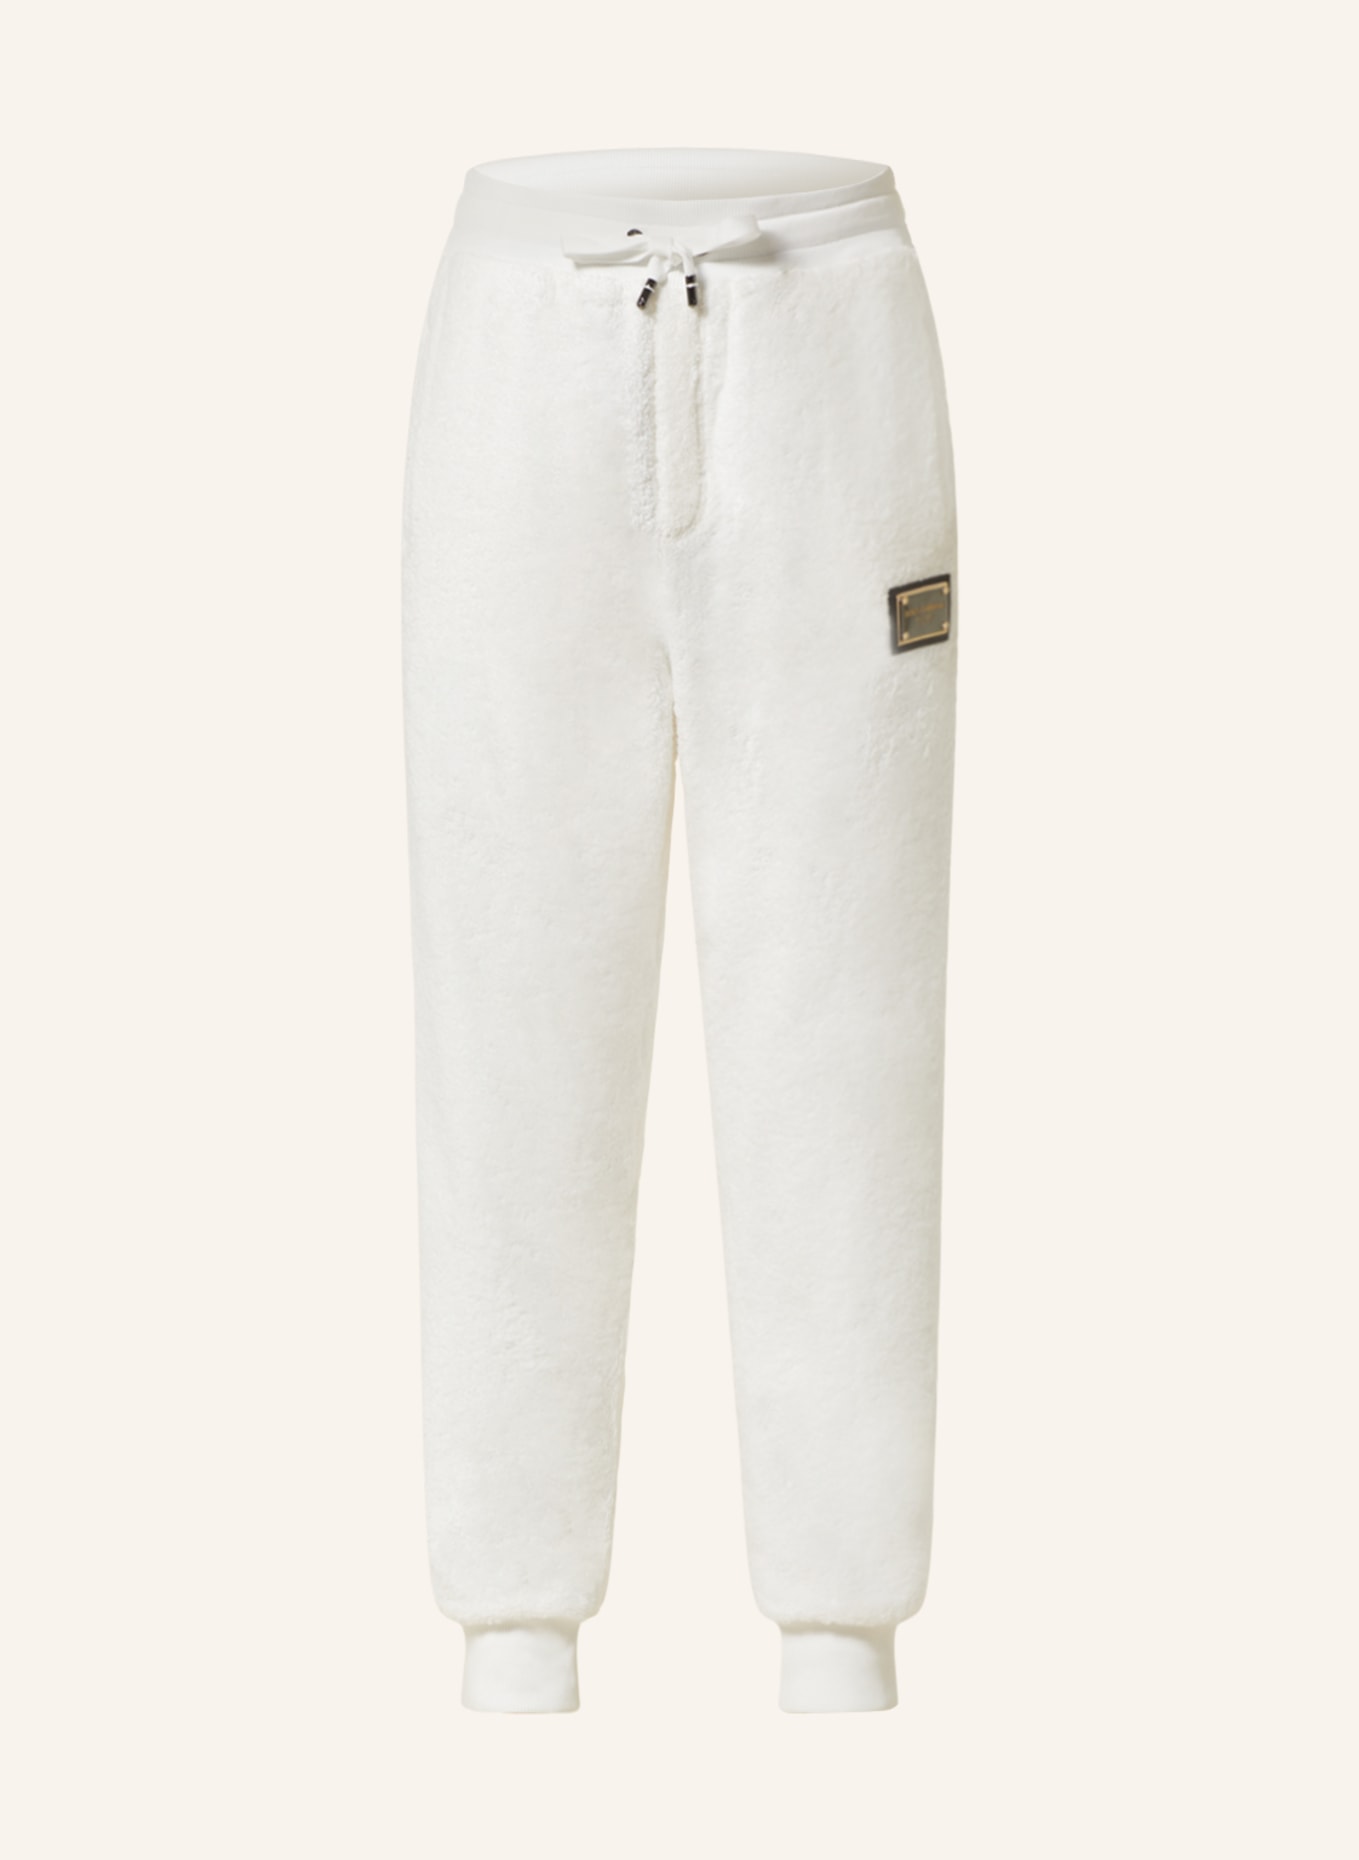 DOLCE & GABBANA Terry cloth pants in jogger style, Color: WHITE (Image 1)